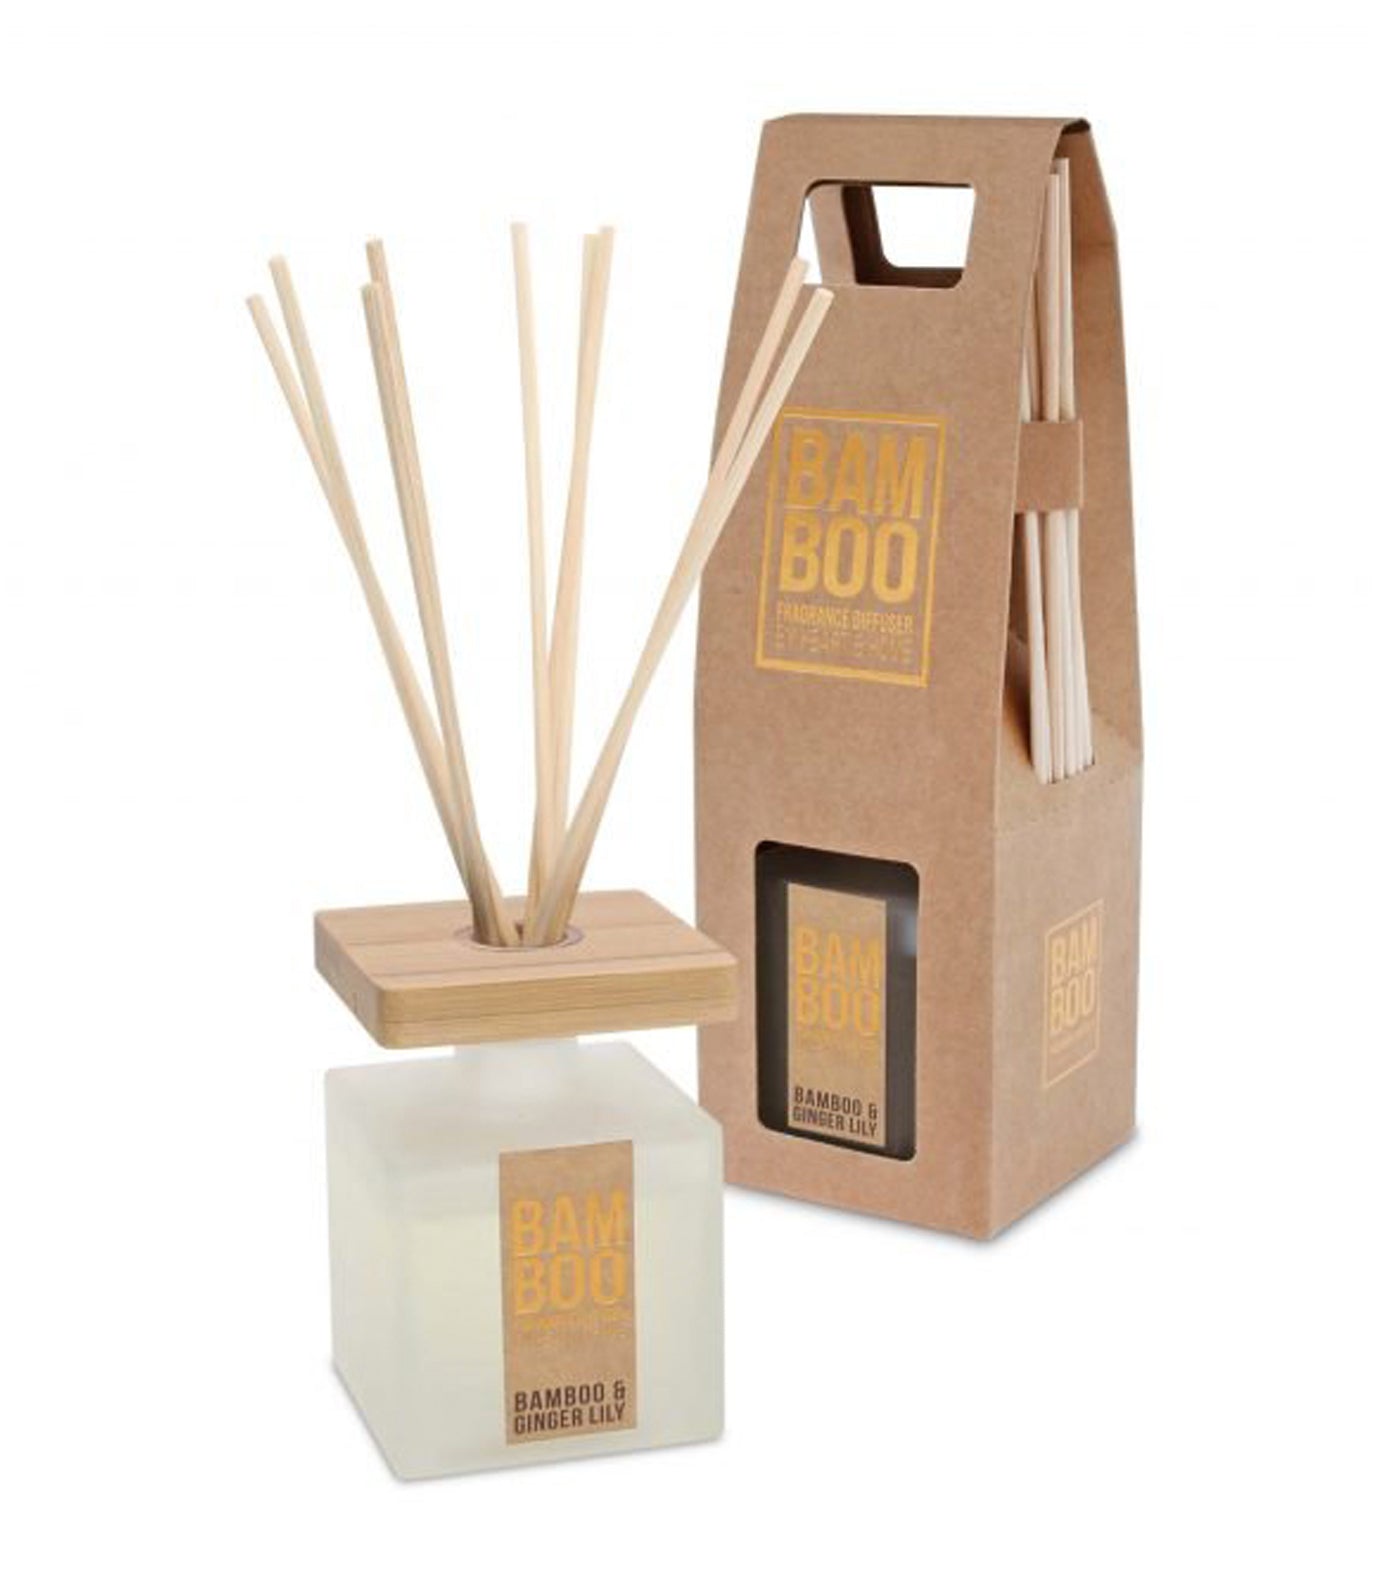 heart & home bamboo fragrance diffuser - bamboo & ginger lily